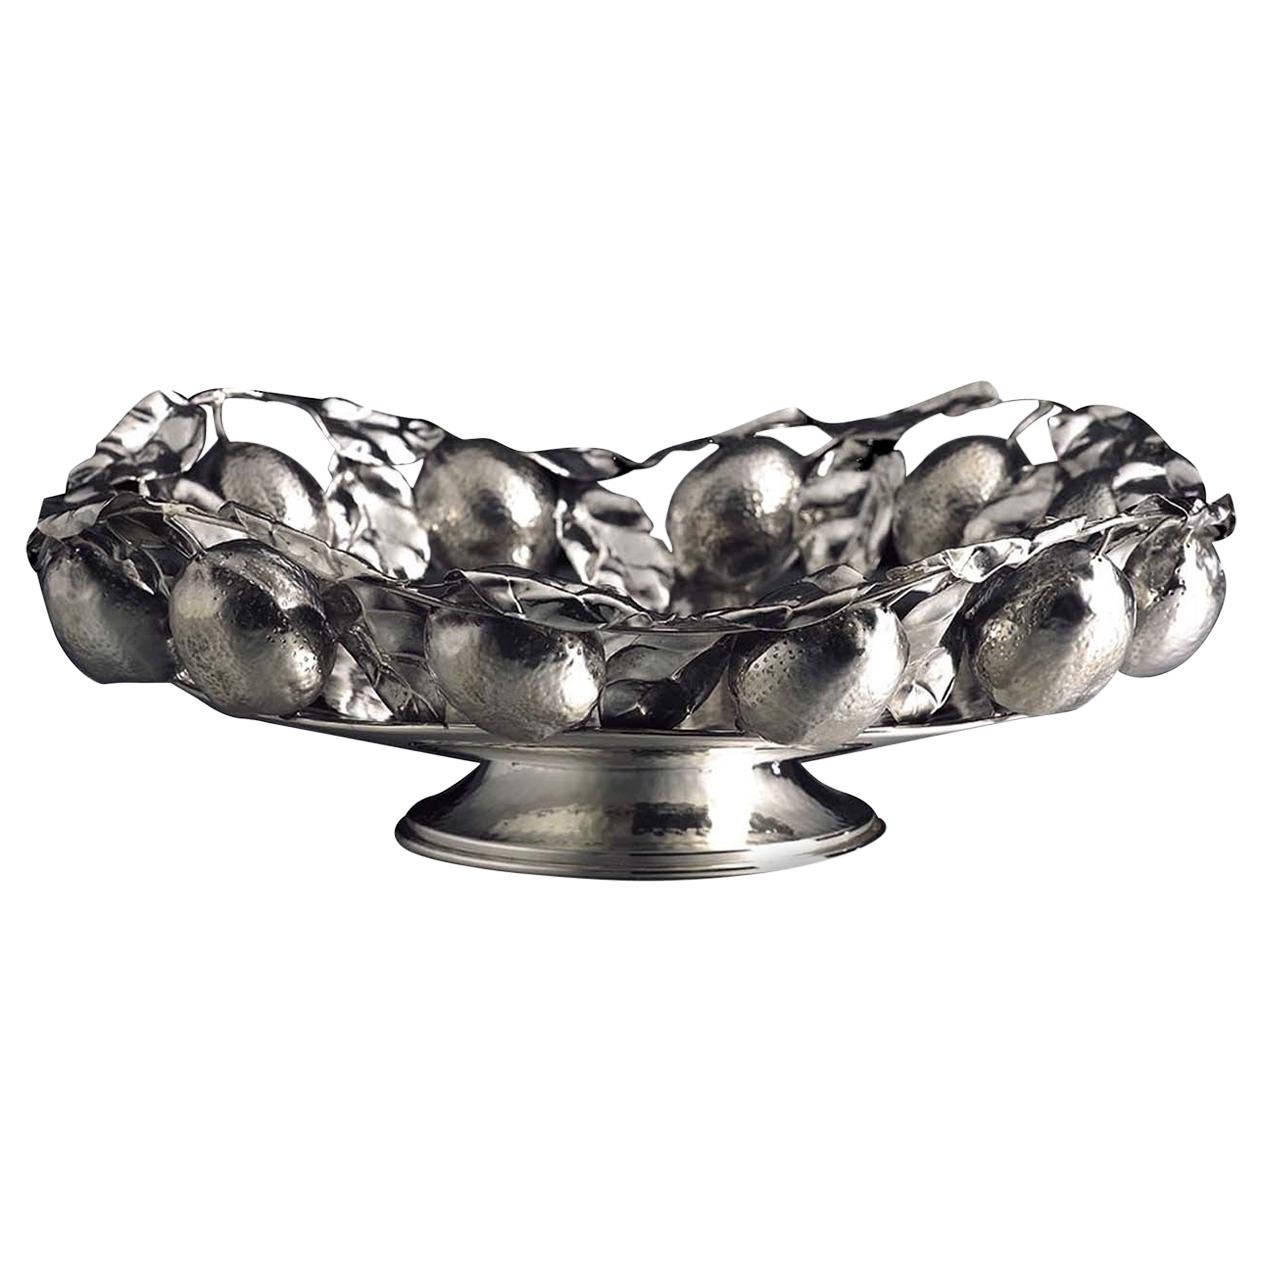 Giant Round Silver Basket with Lemons For Sale